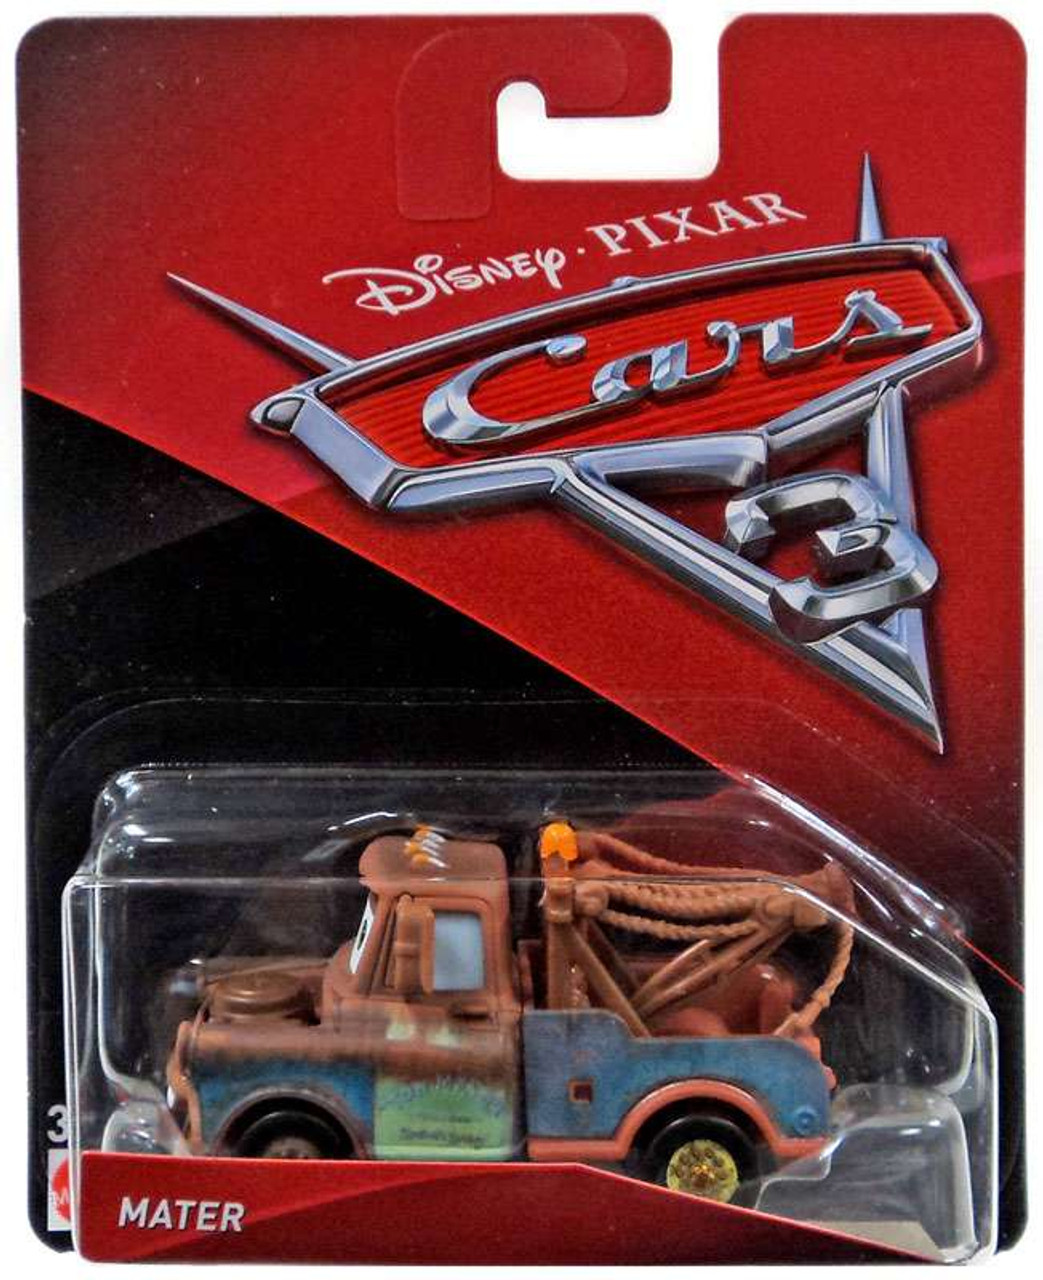 mater toy